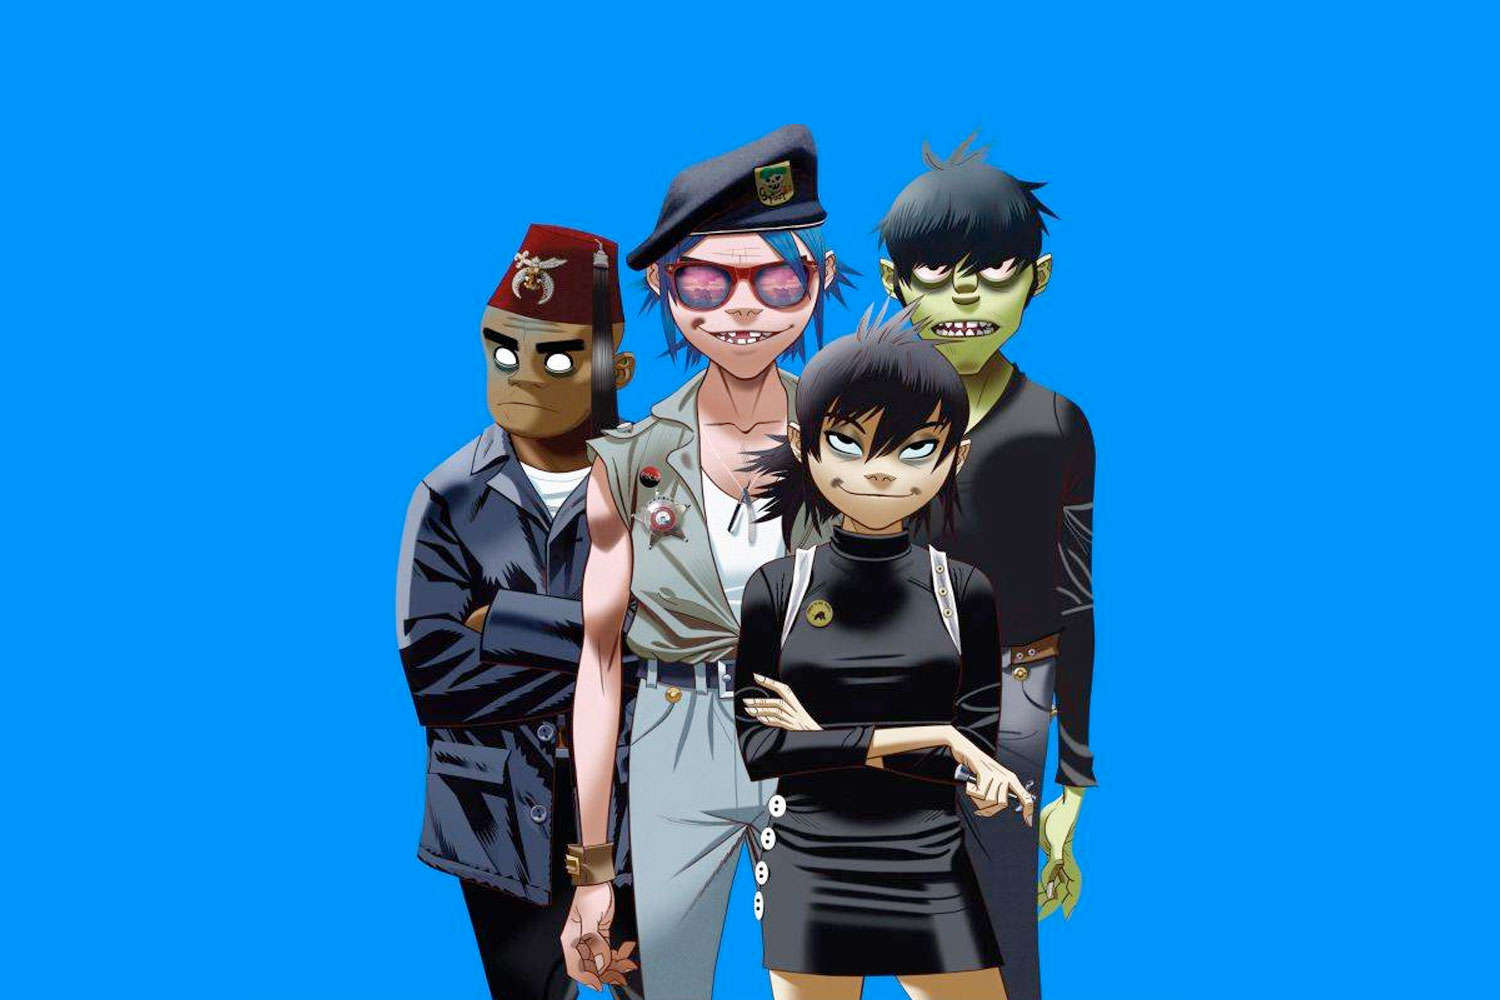 Gorillaz new album THE NOW NOW is out now!